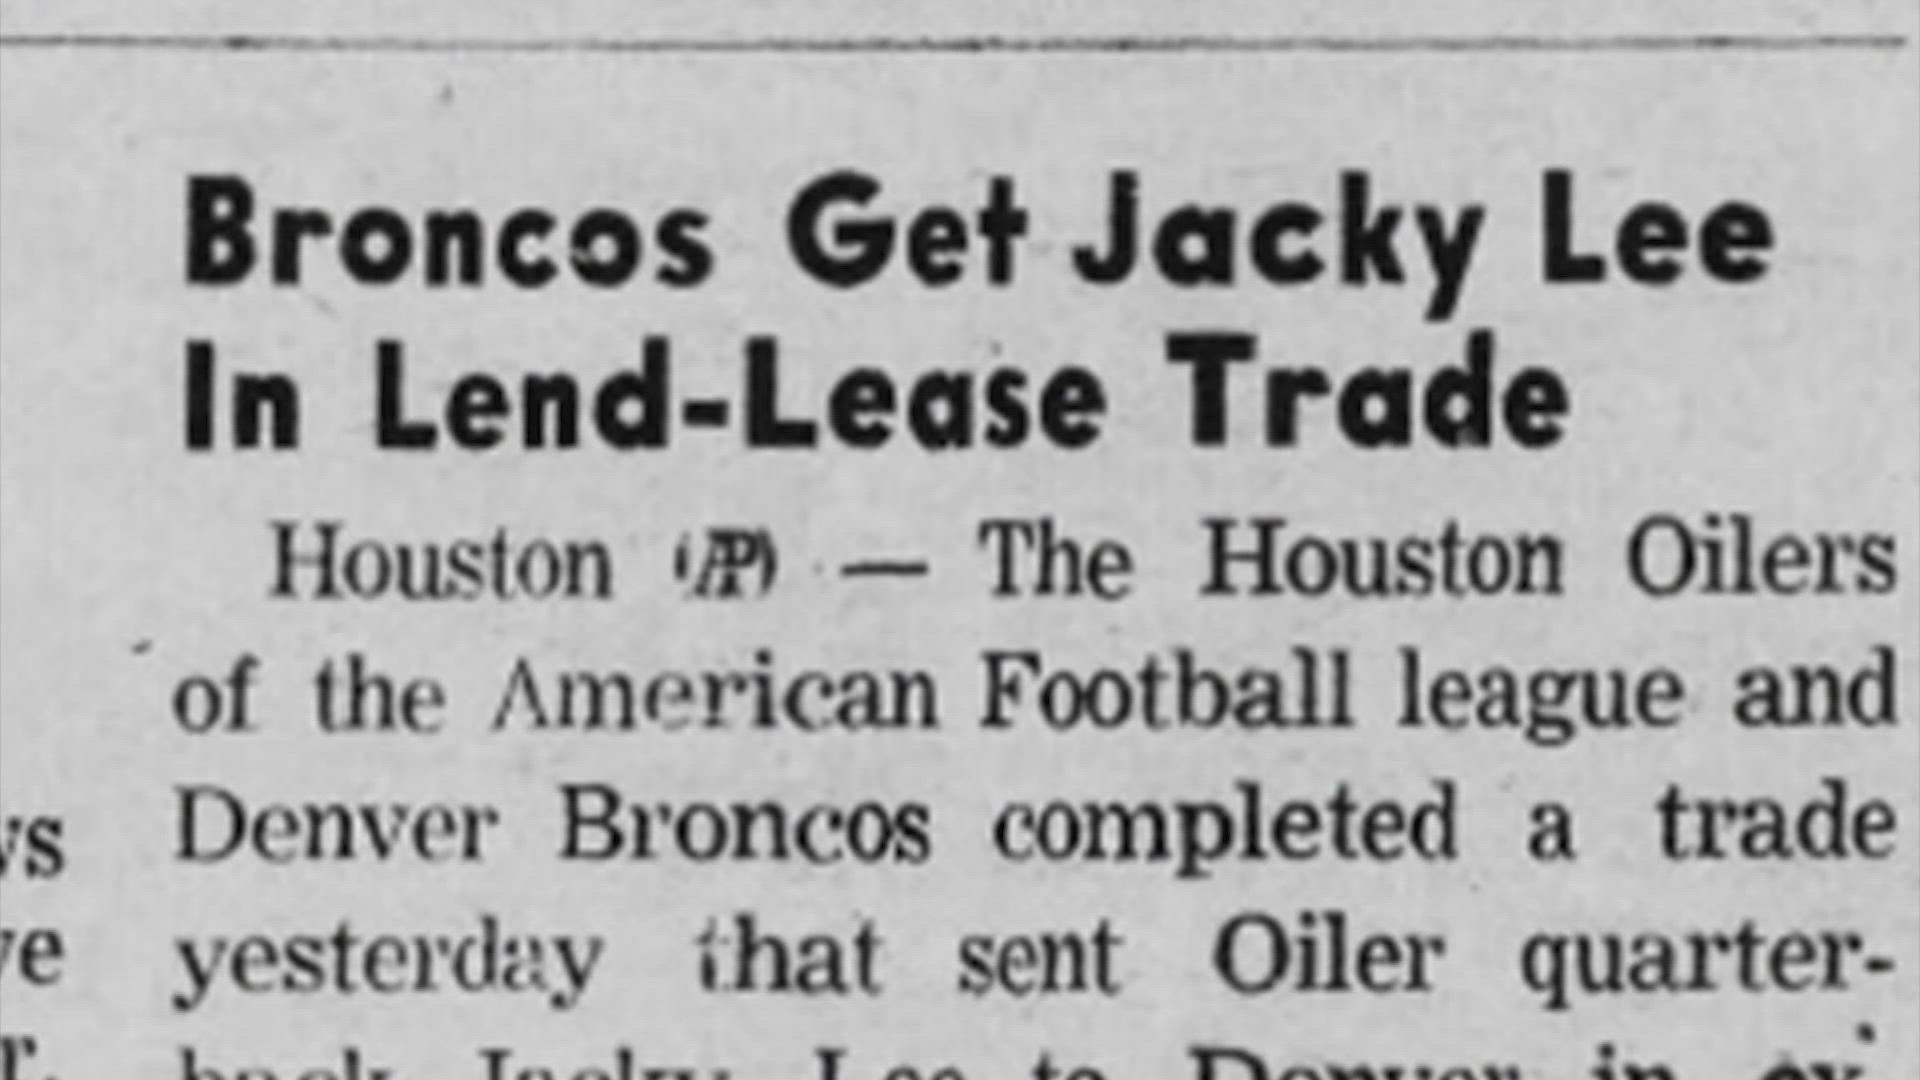 Jacky Lee played in Denver for two years before coming back to Houston.